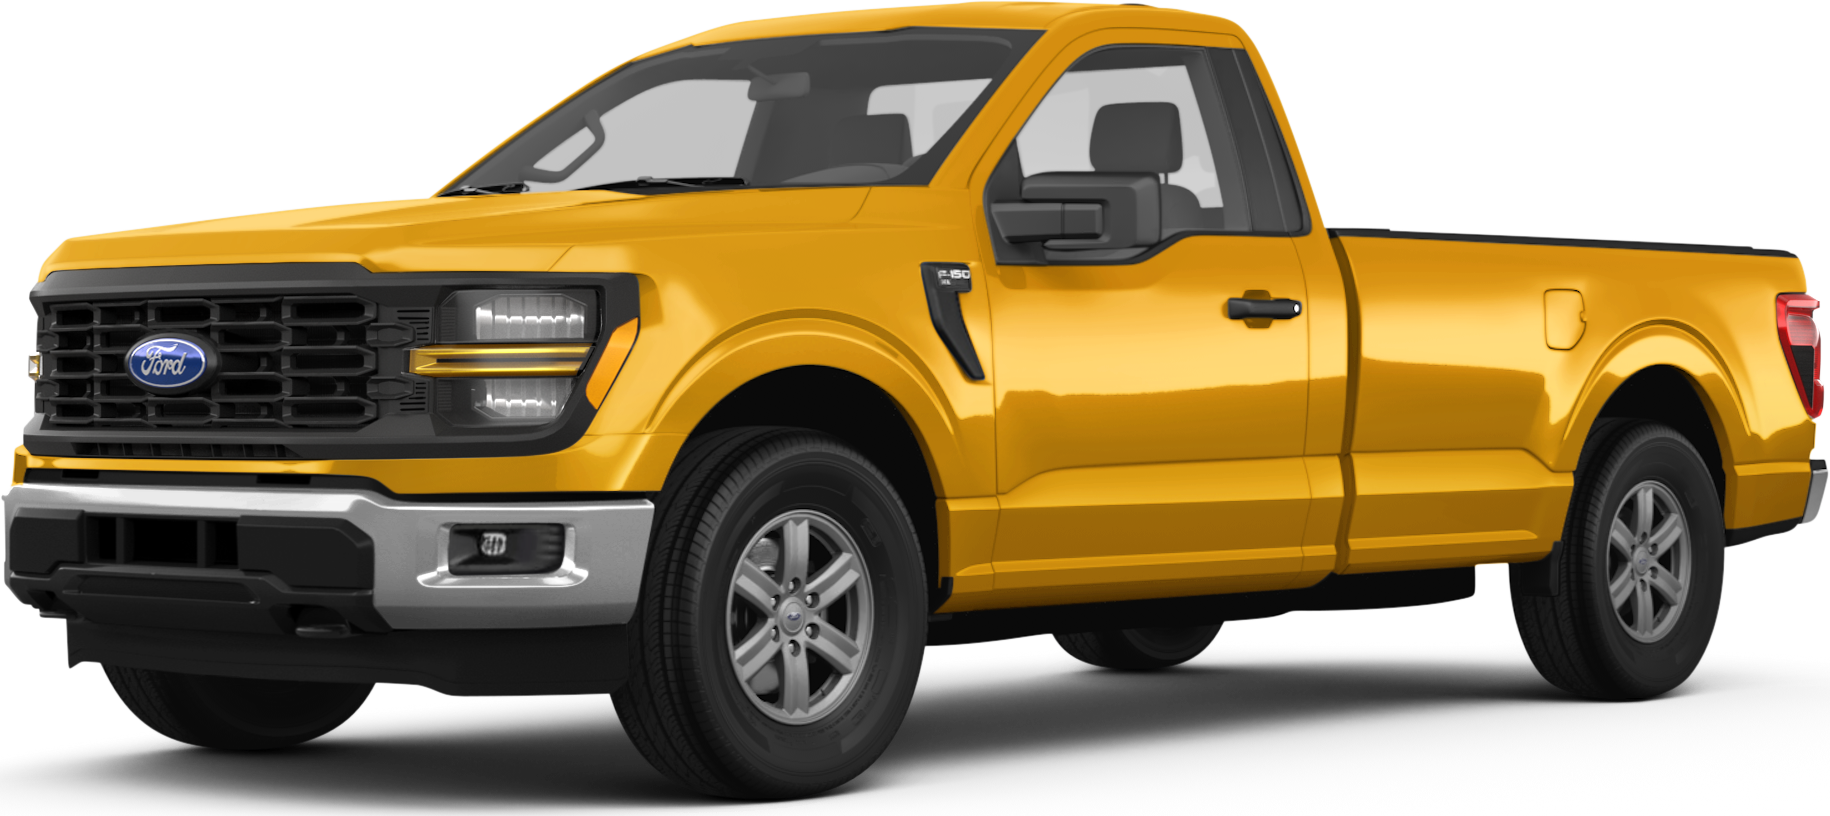 Ford Global Item Listing page